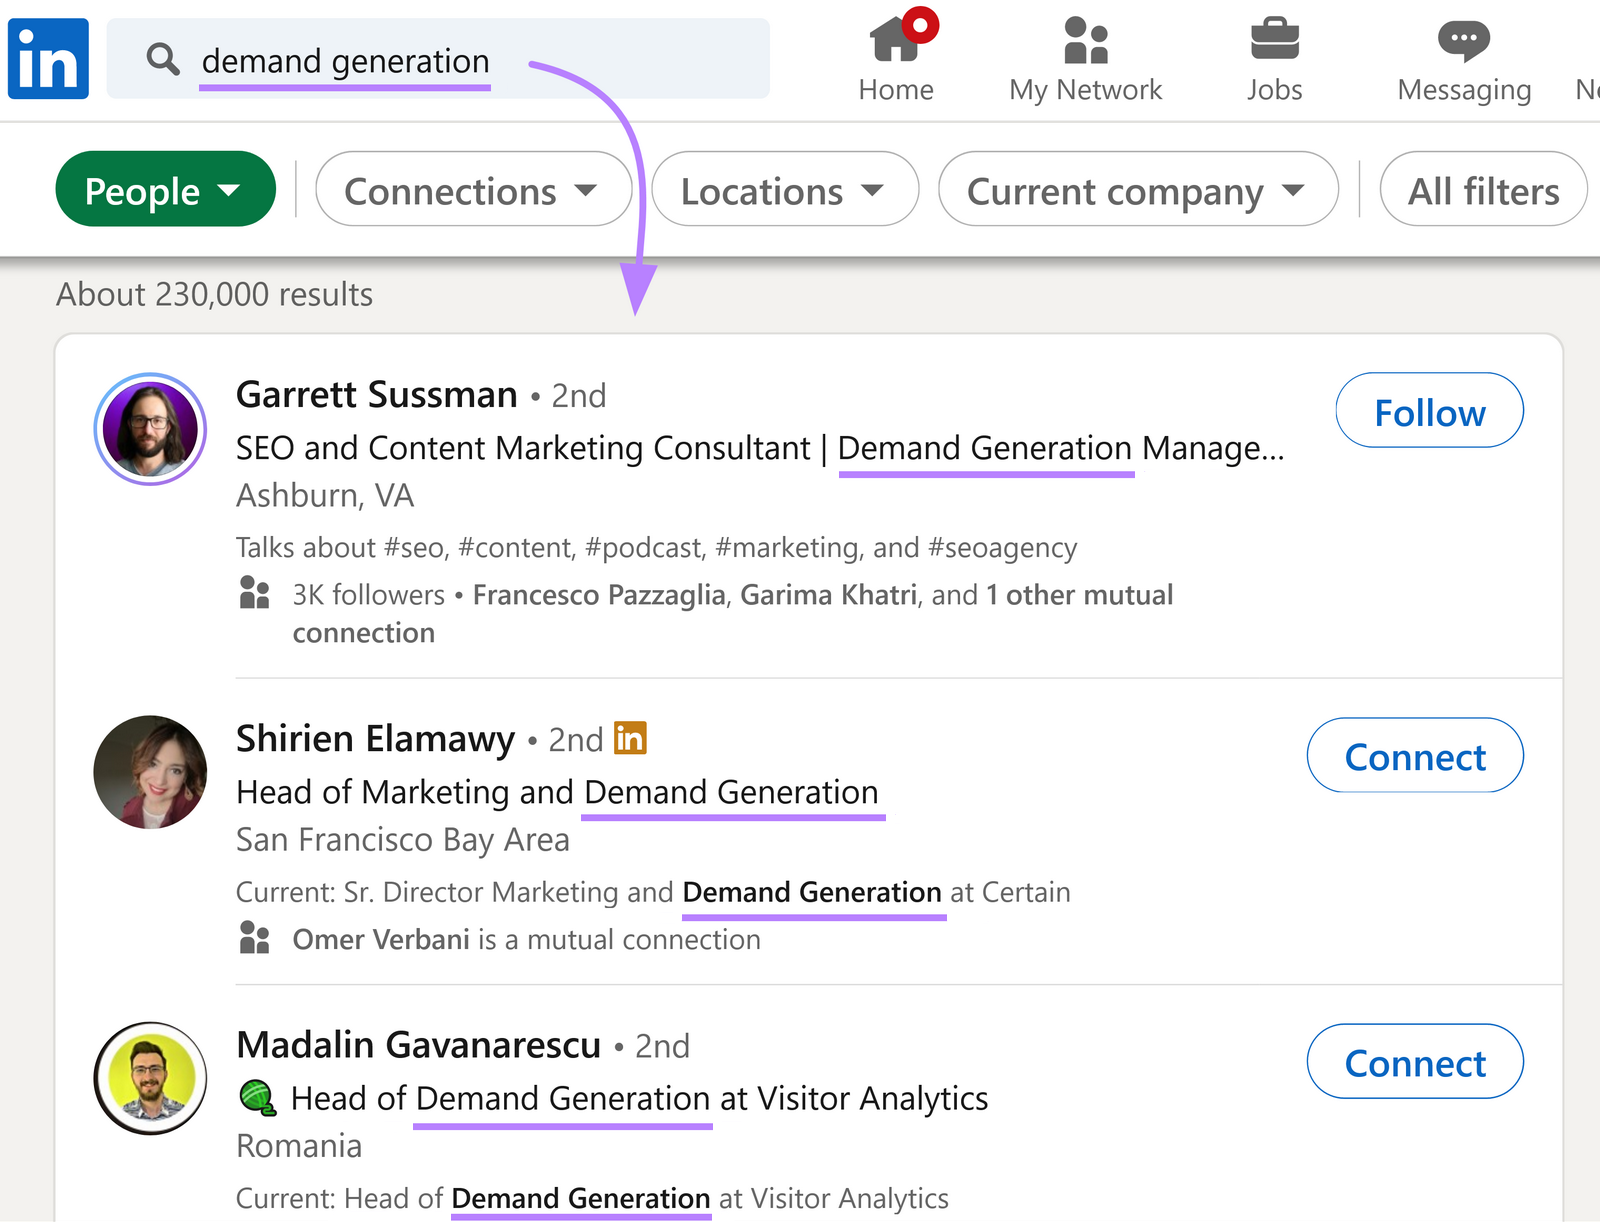 LinkedIn search results for “demand generation” shows profiles that contain target keyword